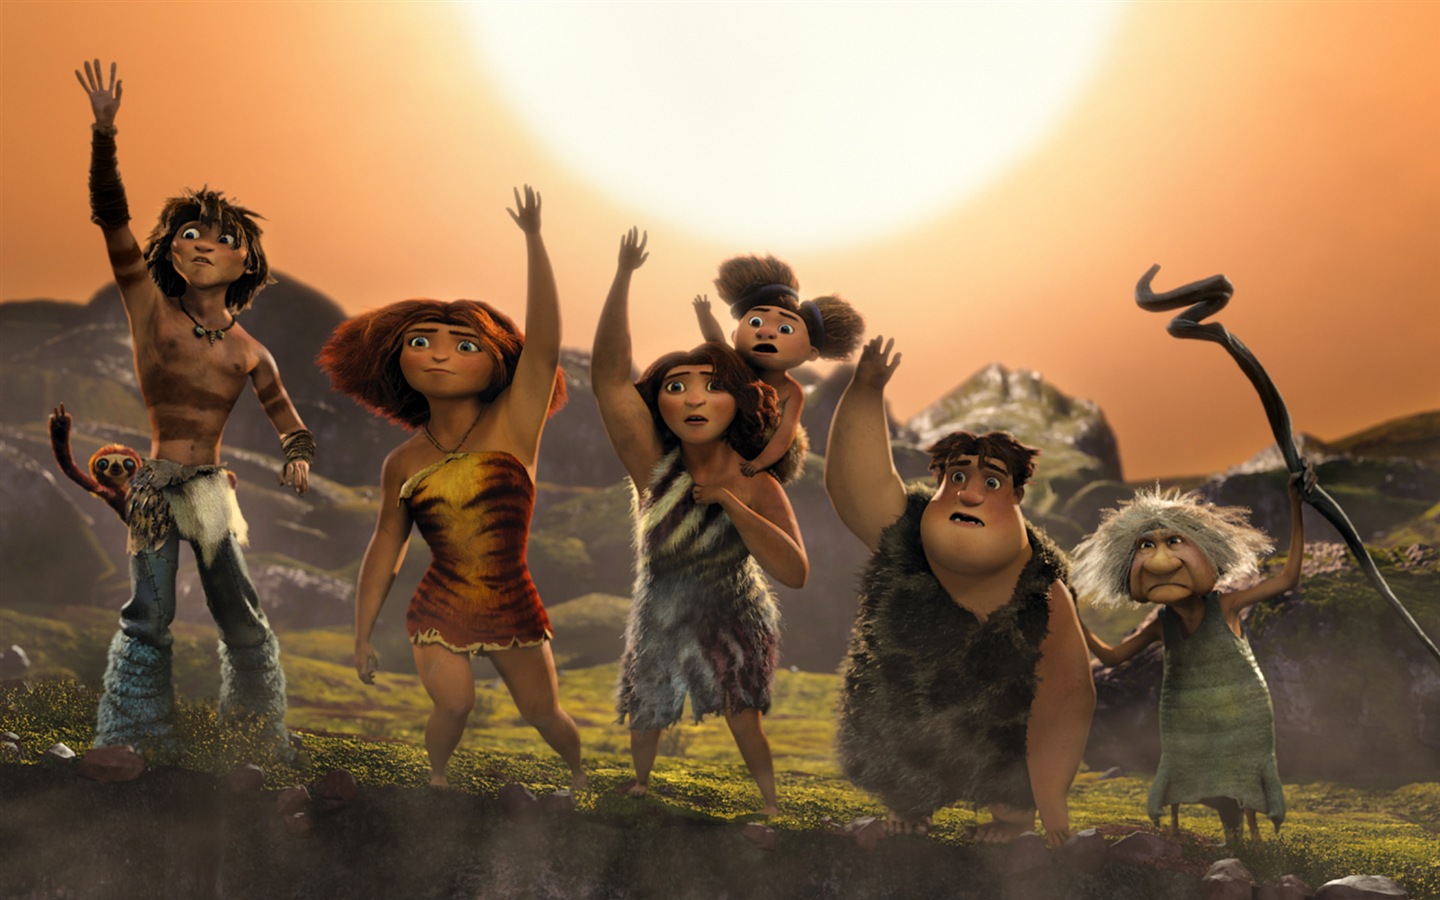 The Croods HD movie wallpapers #4 - 1440x900